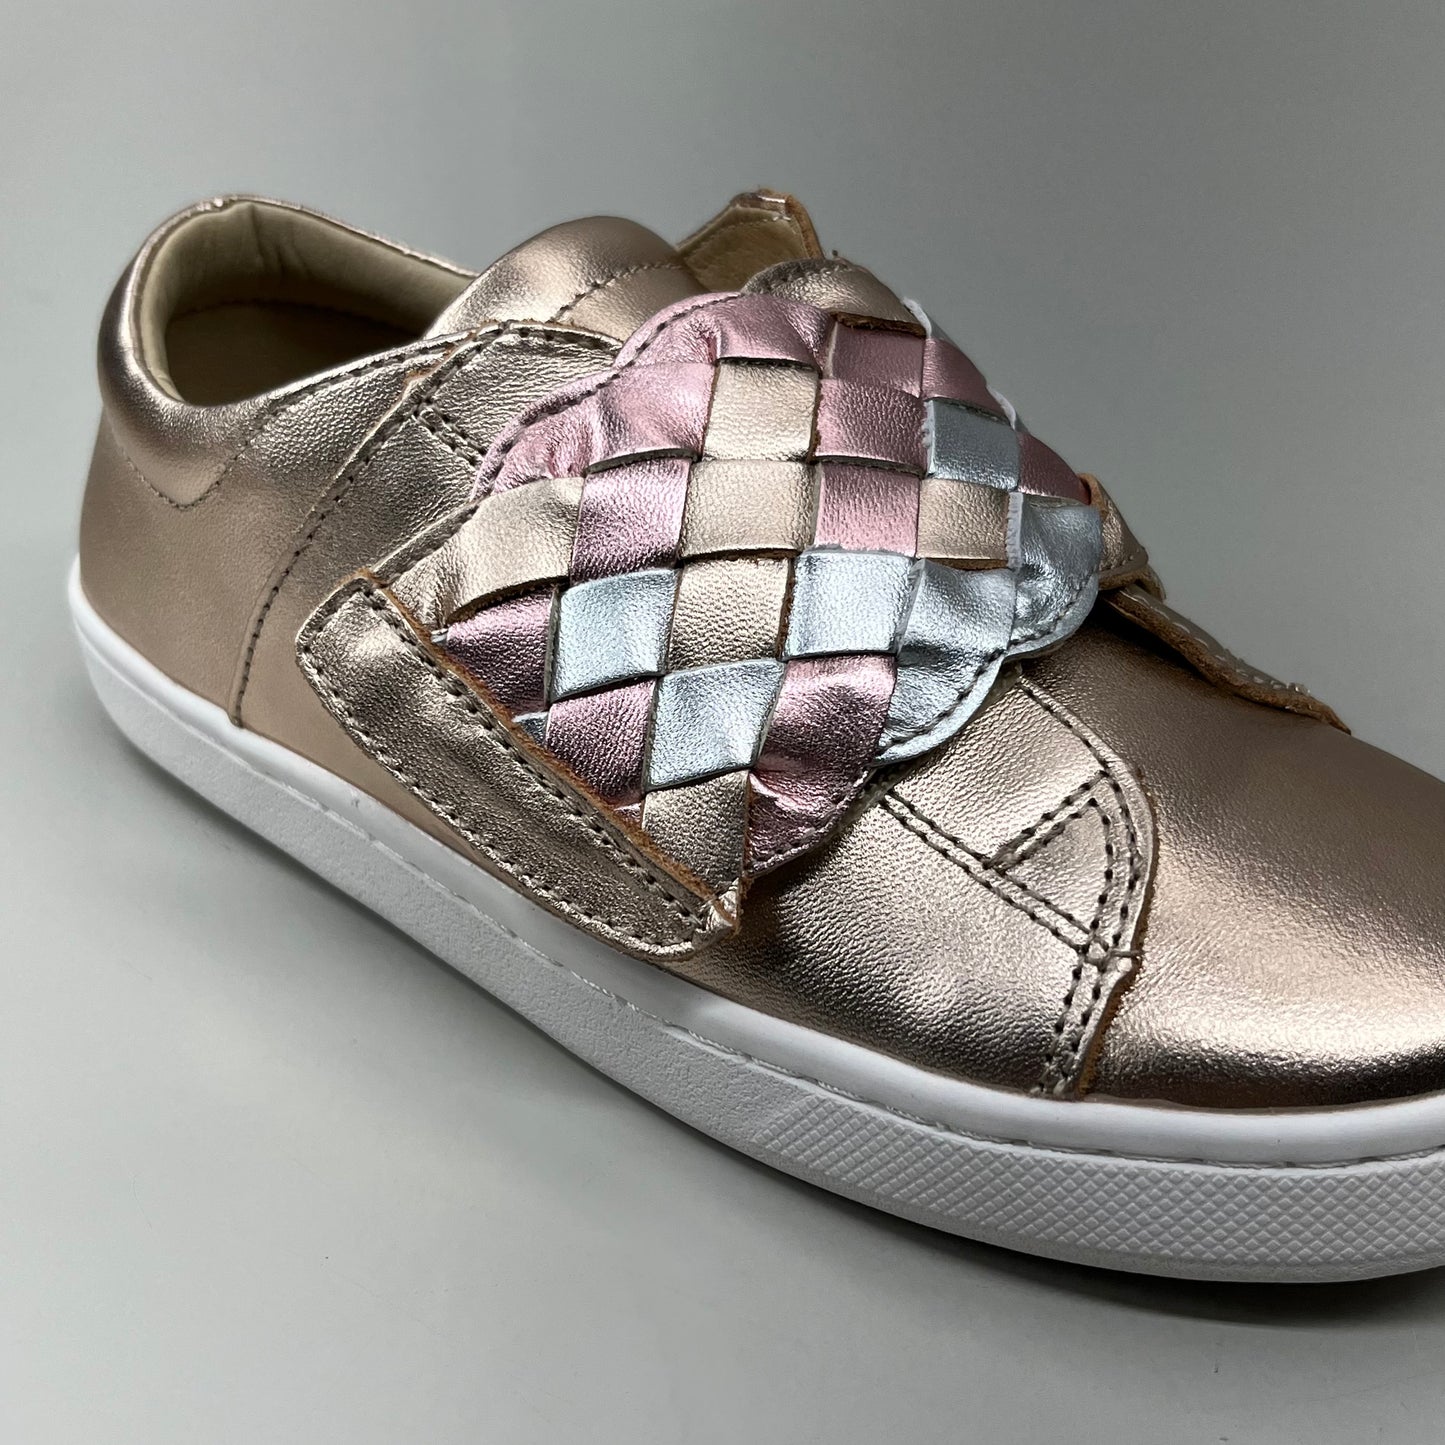 OLD SOLES Igster Sneakers Kid's Leather Shoe Sz 31 US 13.5 Copper/Silver/Pink Frost #6132